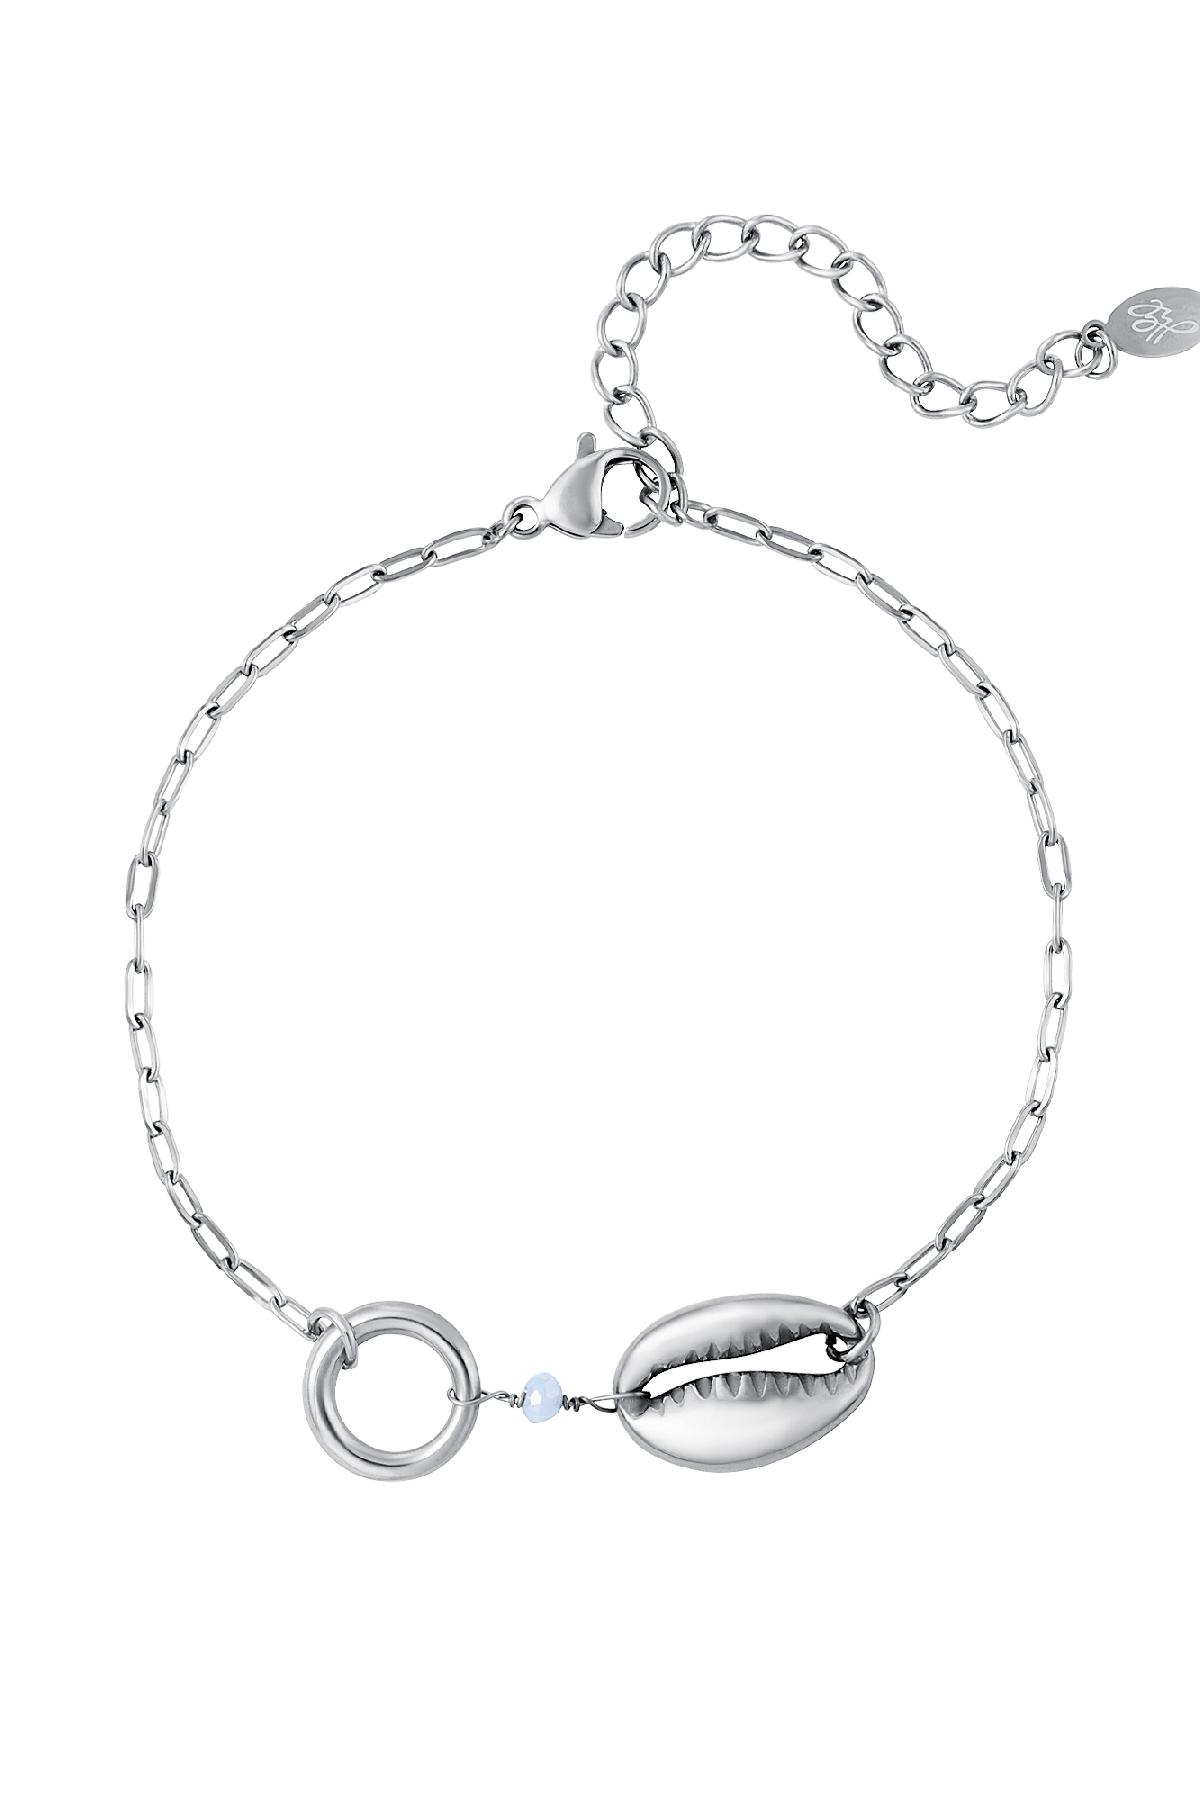 Shell bracelet - Beach collection Silver Stainless Steel